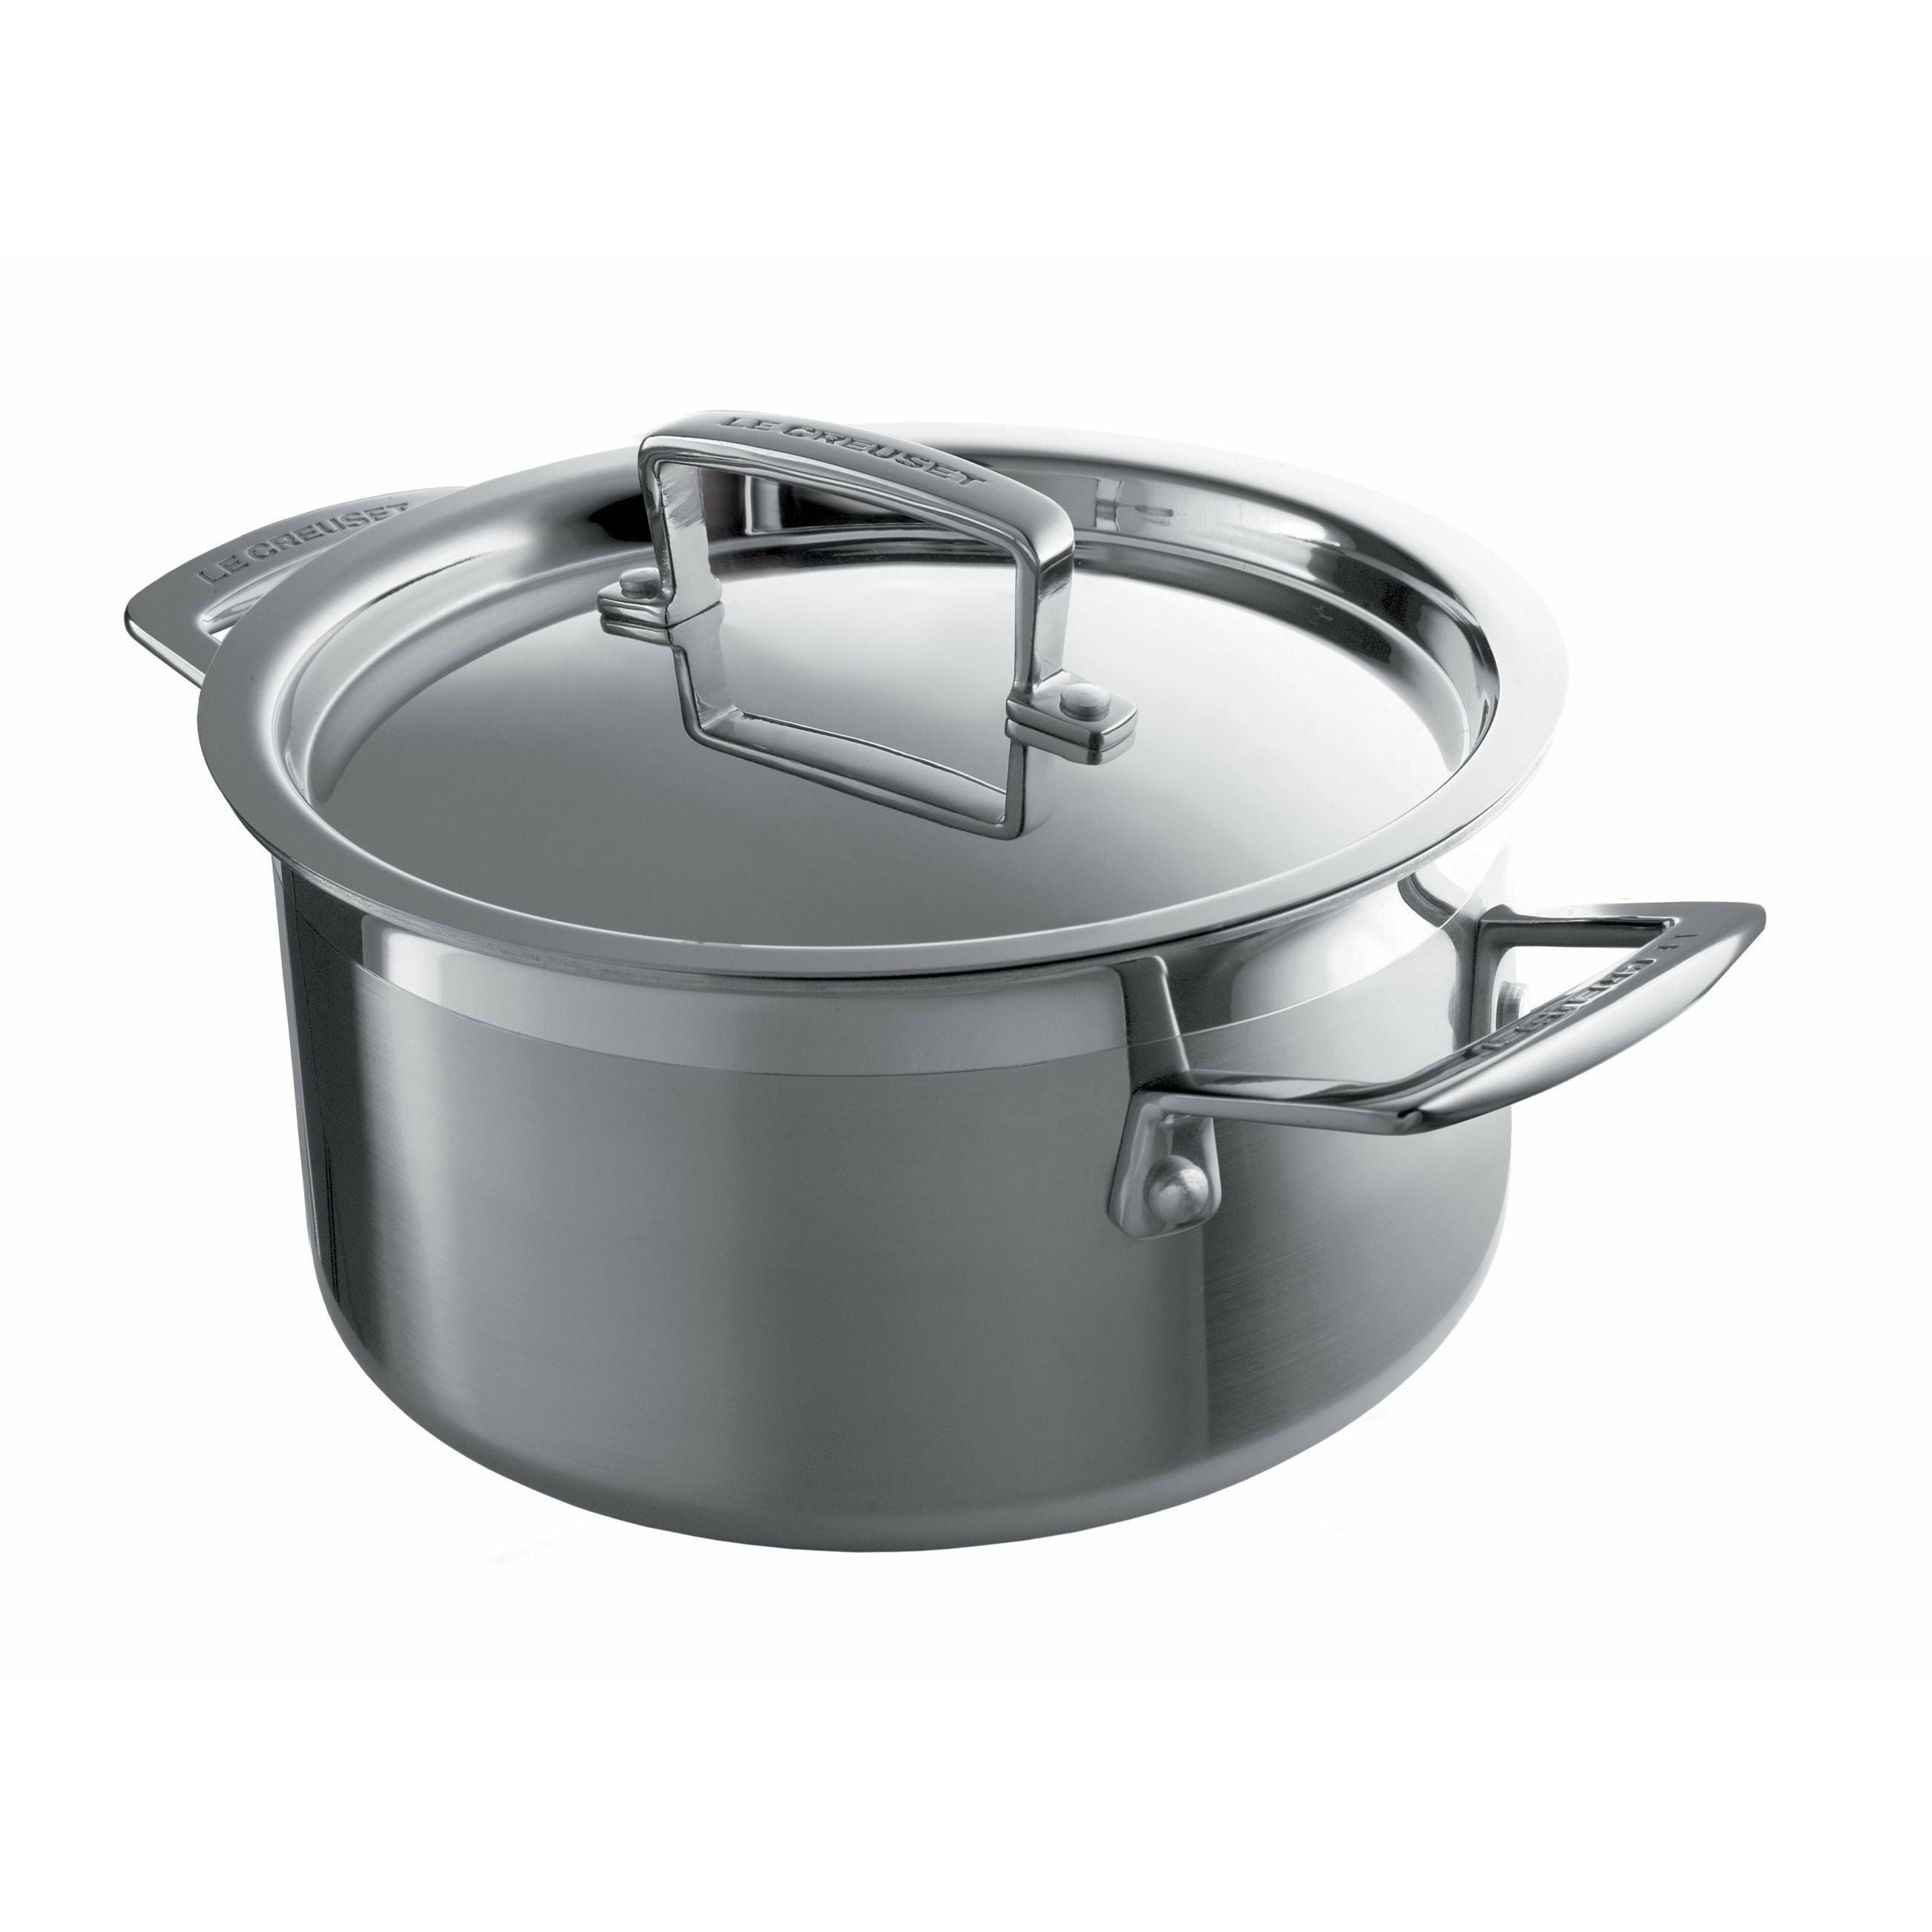 Le Creuset 3 Ply Stainless Steel Casserole With Lid 3 L, 20 Cm